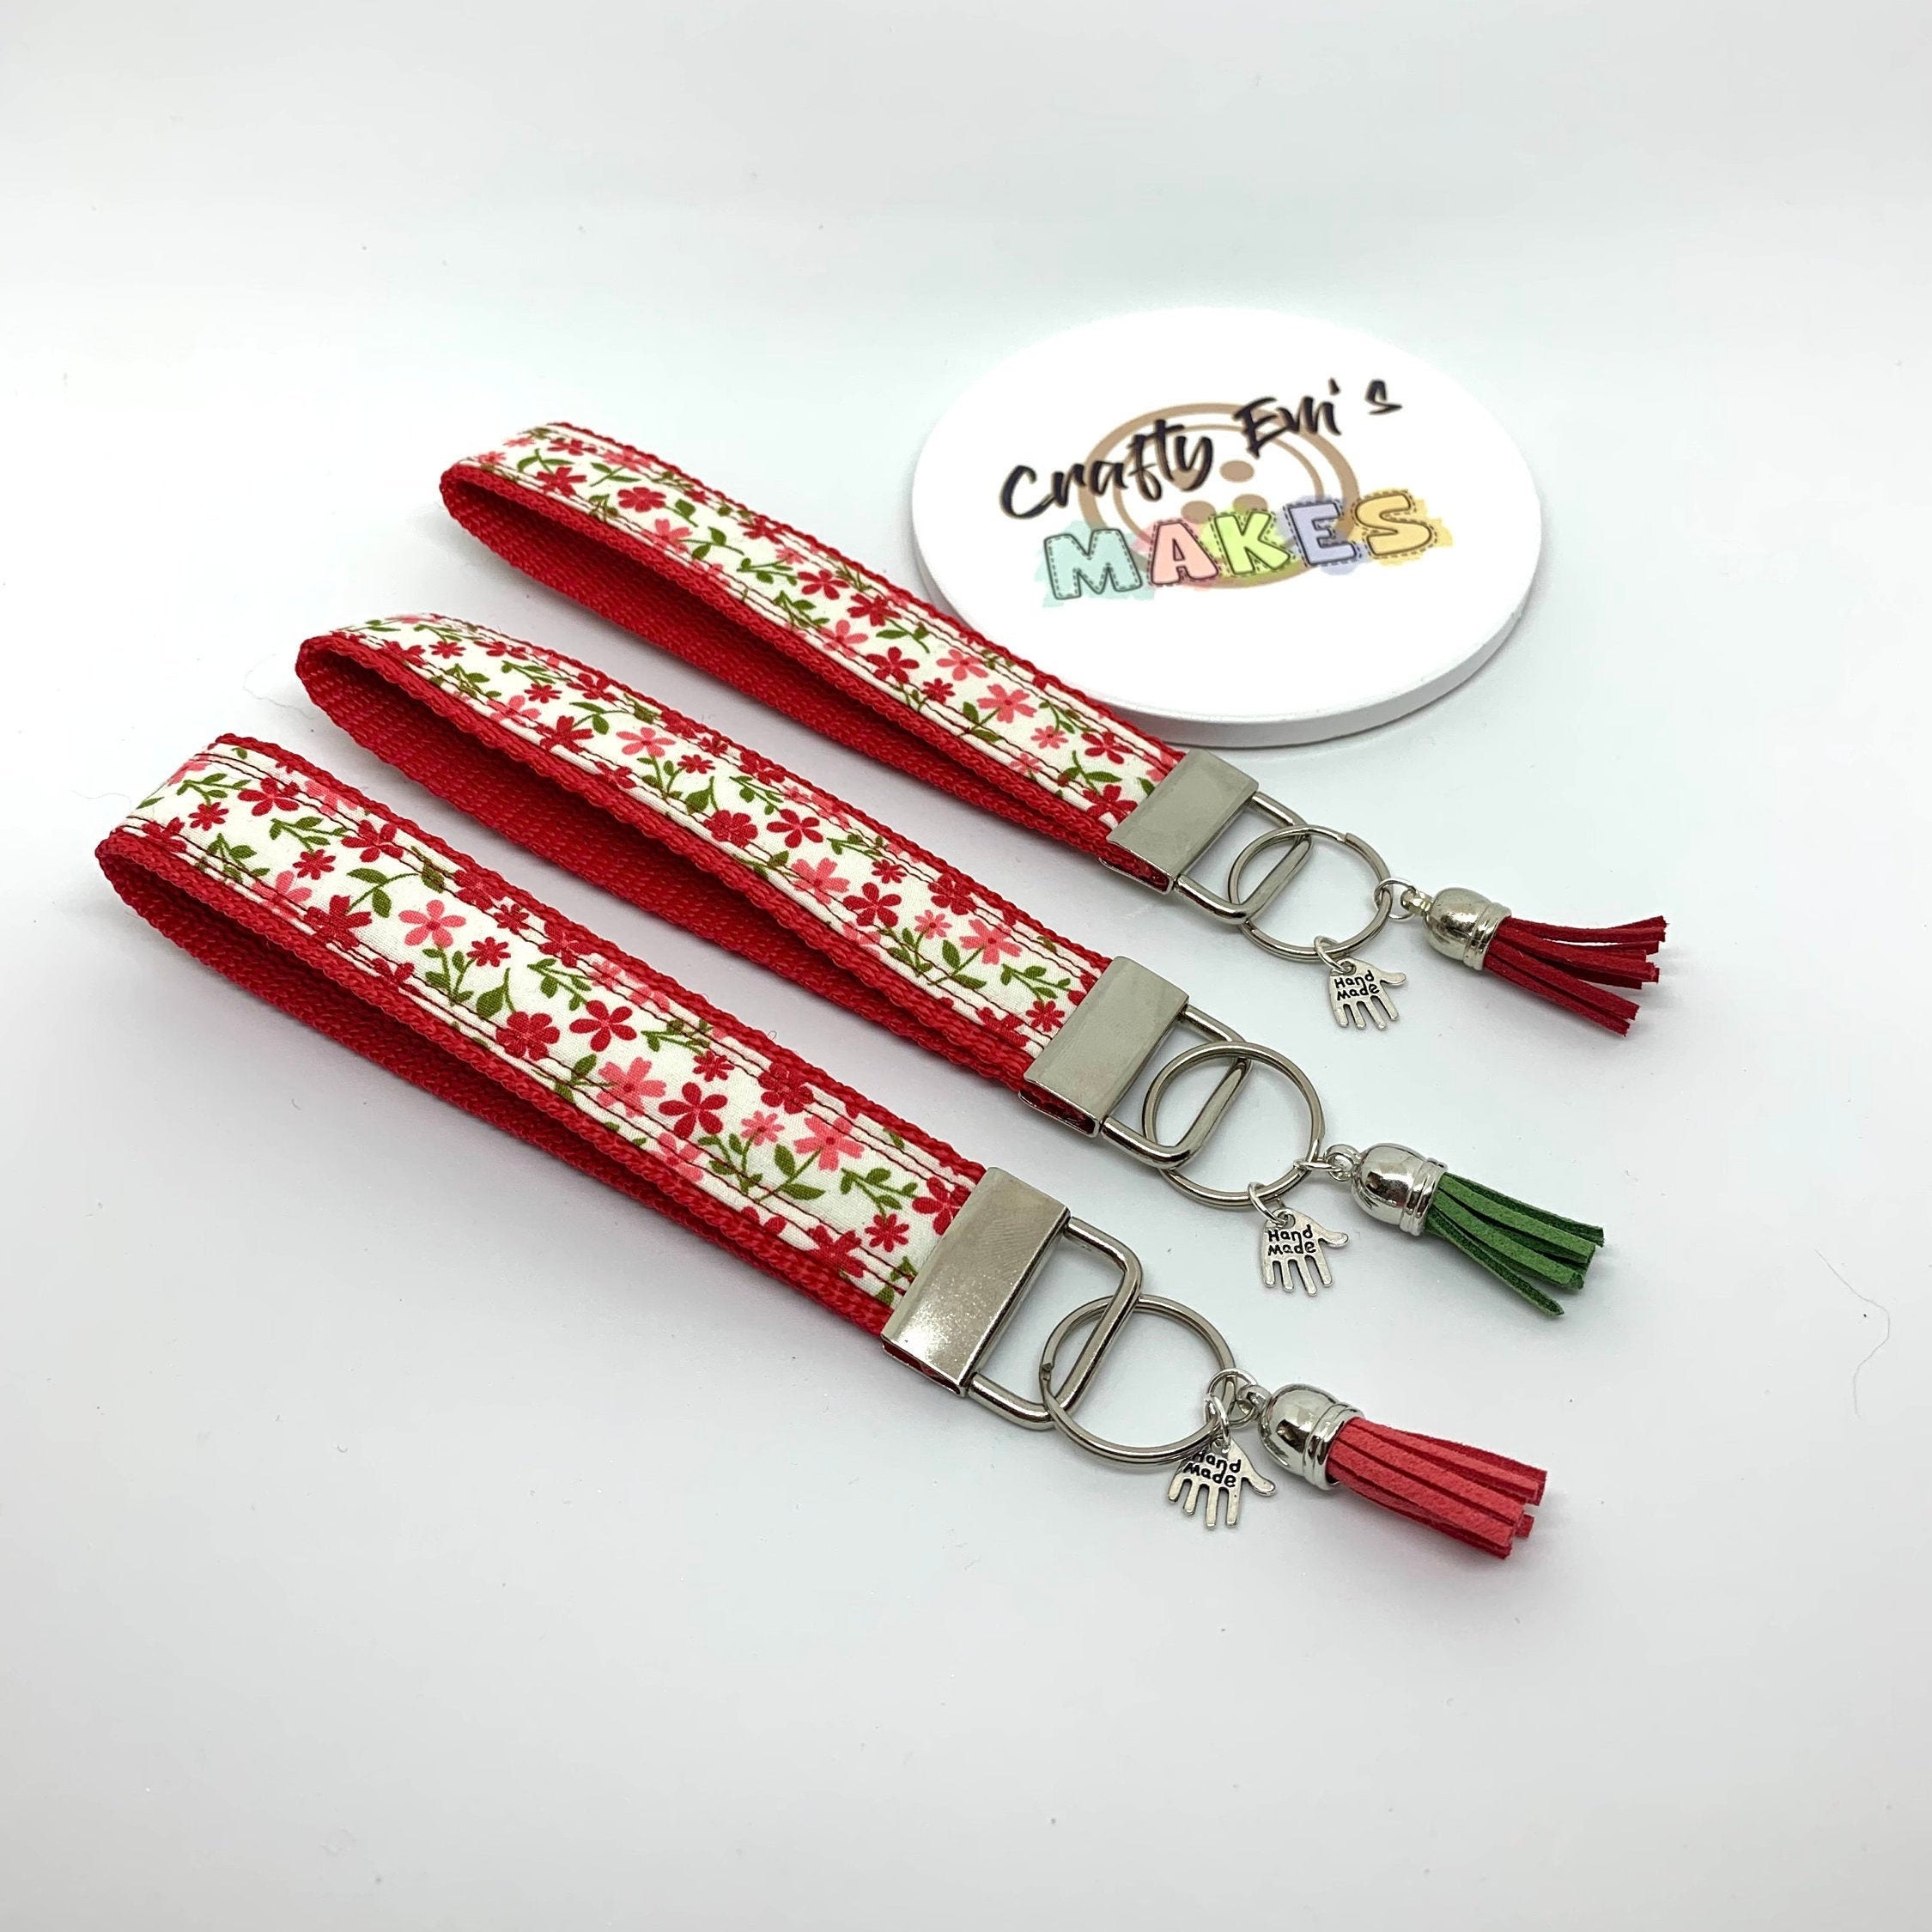 Wristlet Strap and Neck Straps Lanyard Combo，Key Chain Holder，Hand Wrist Lanyard Key Chain Holder，Cool Neck Strap Key Chain Holder Cool Lanyards 